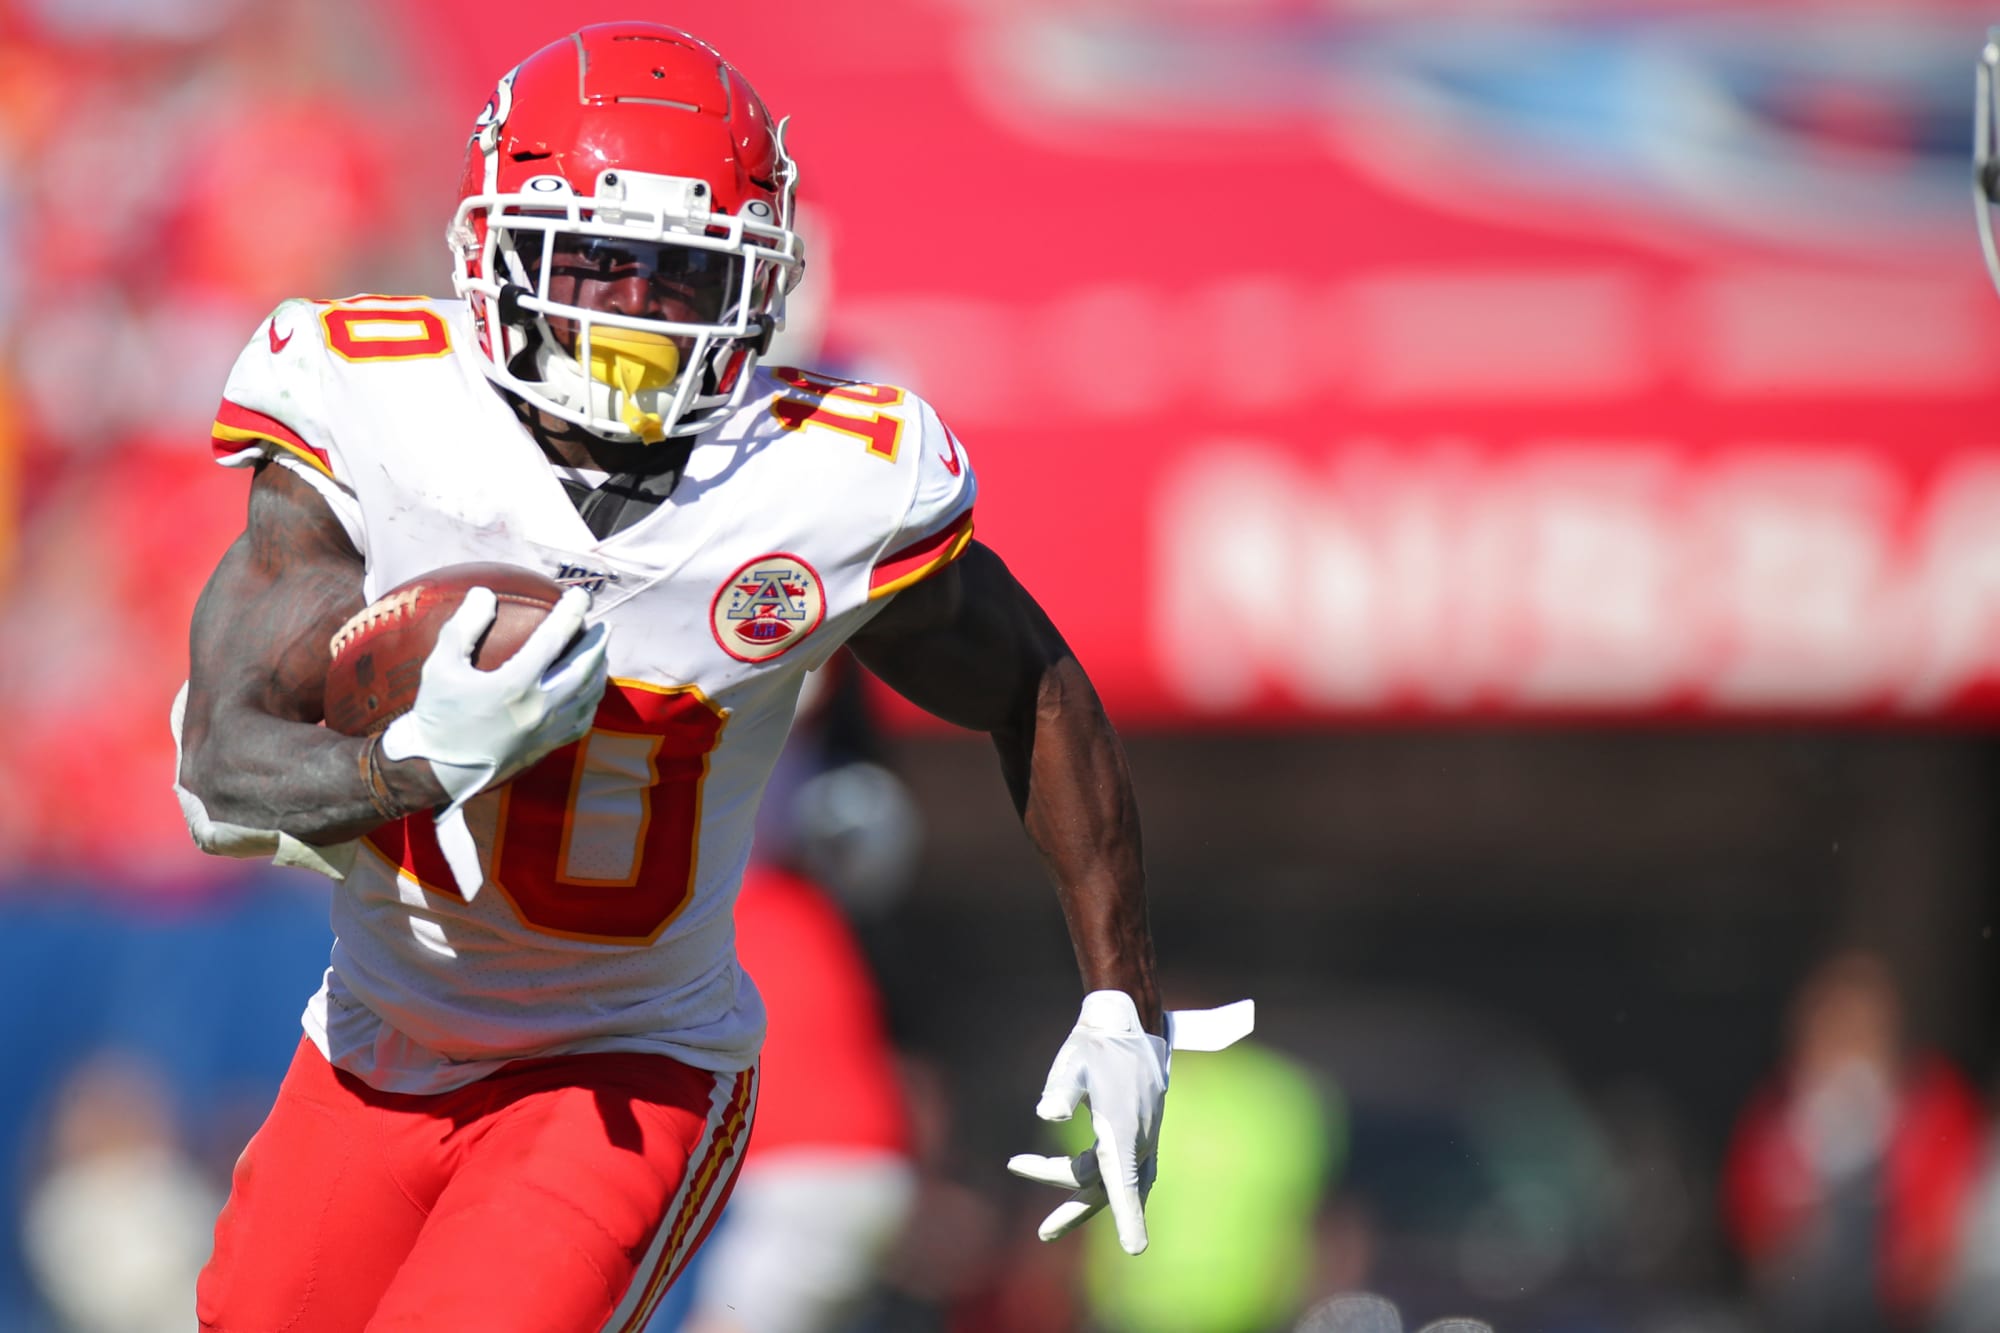 Tyreek Hill says yoga training will lead to 'crazy year' in 2020